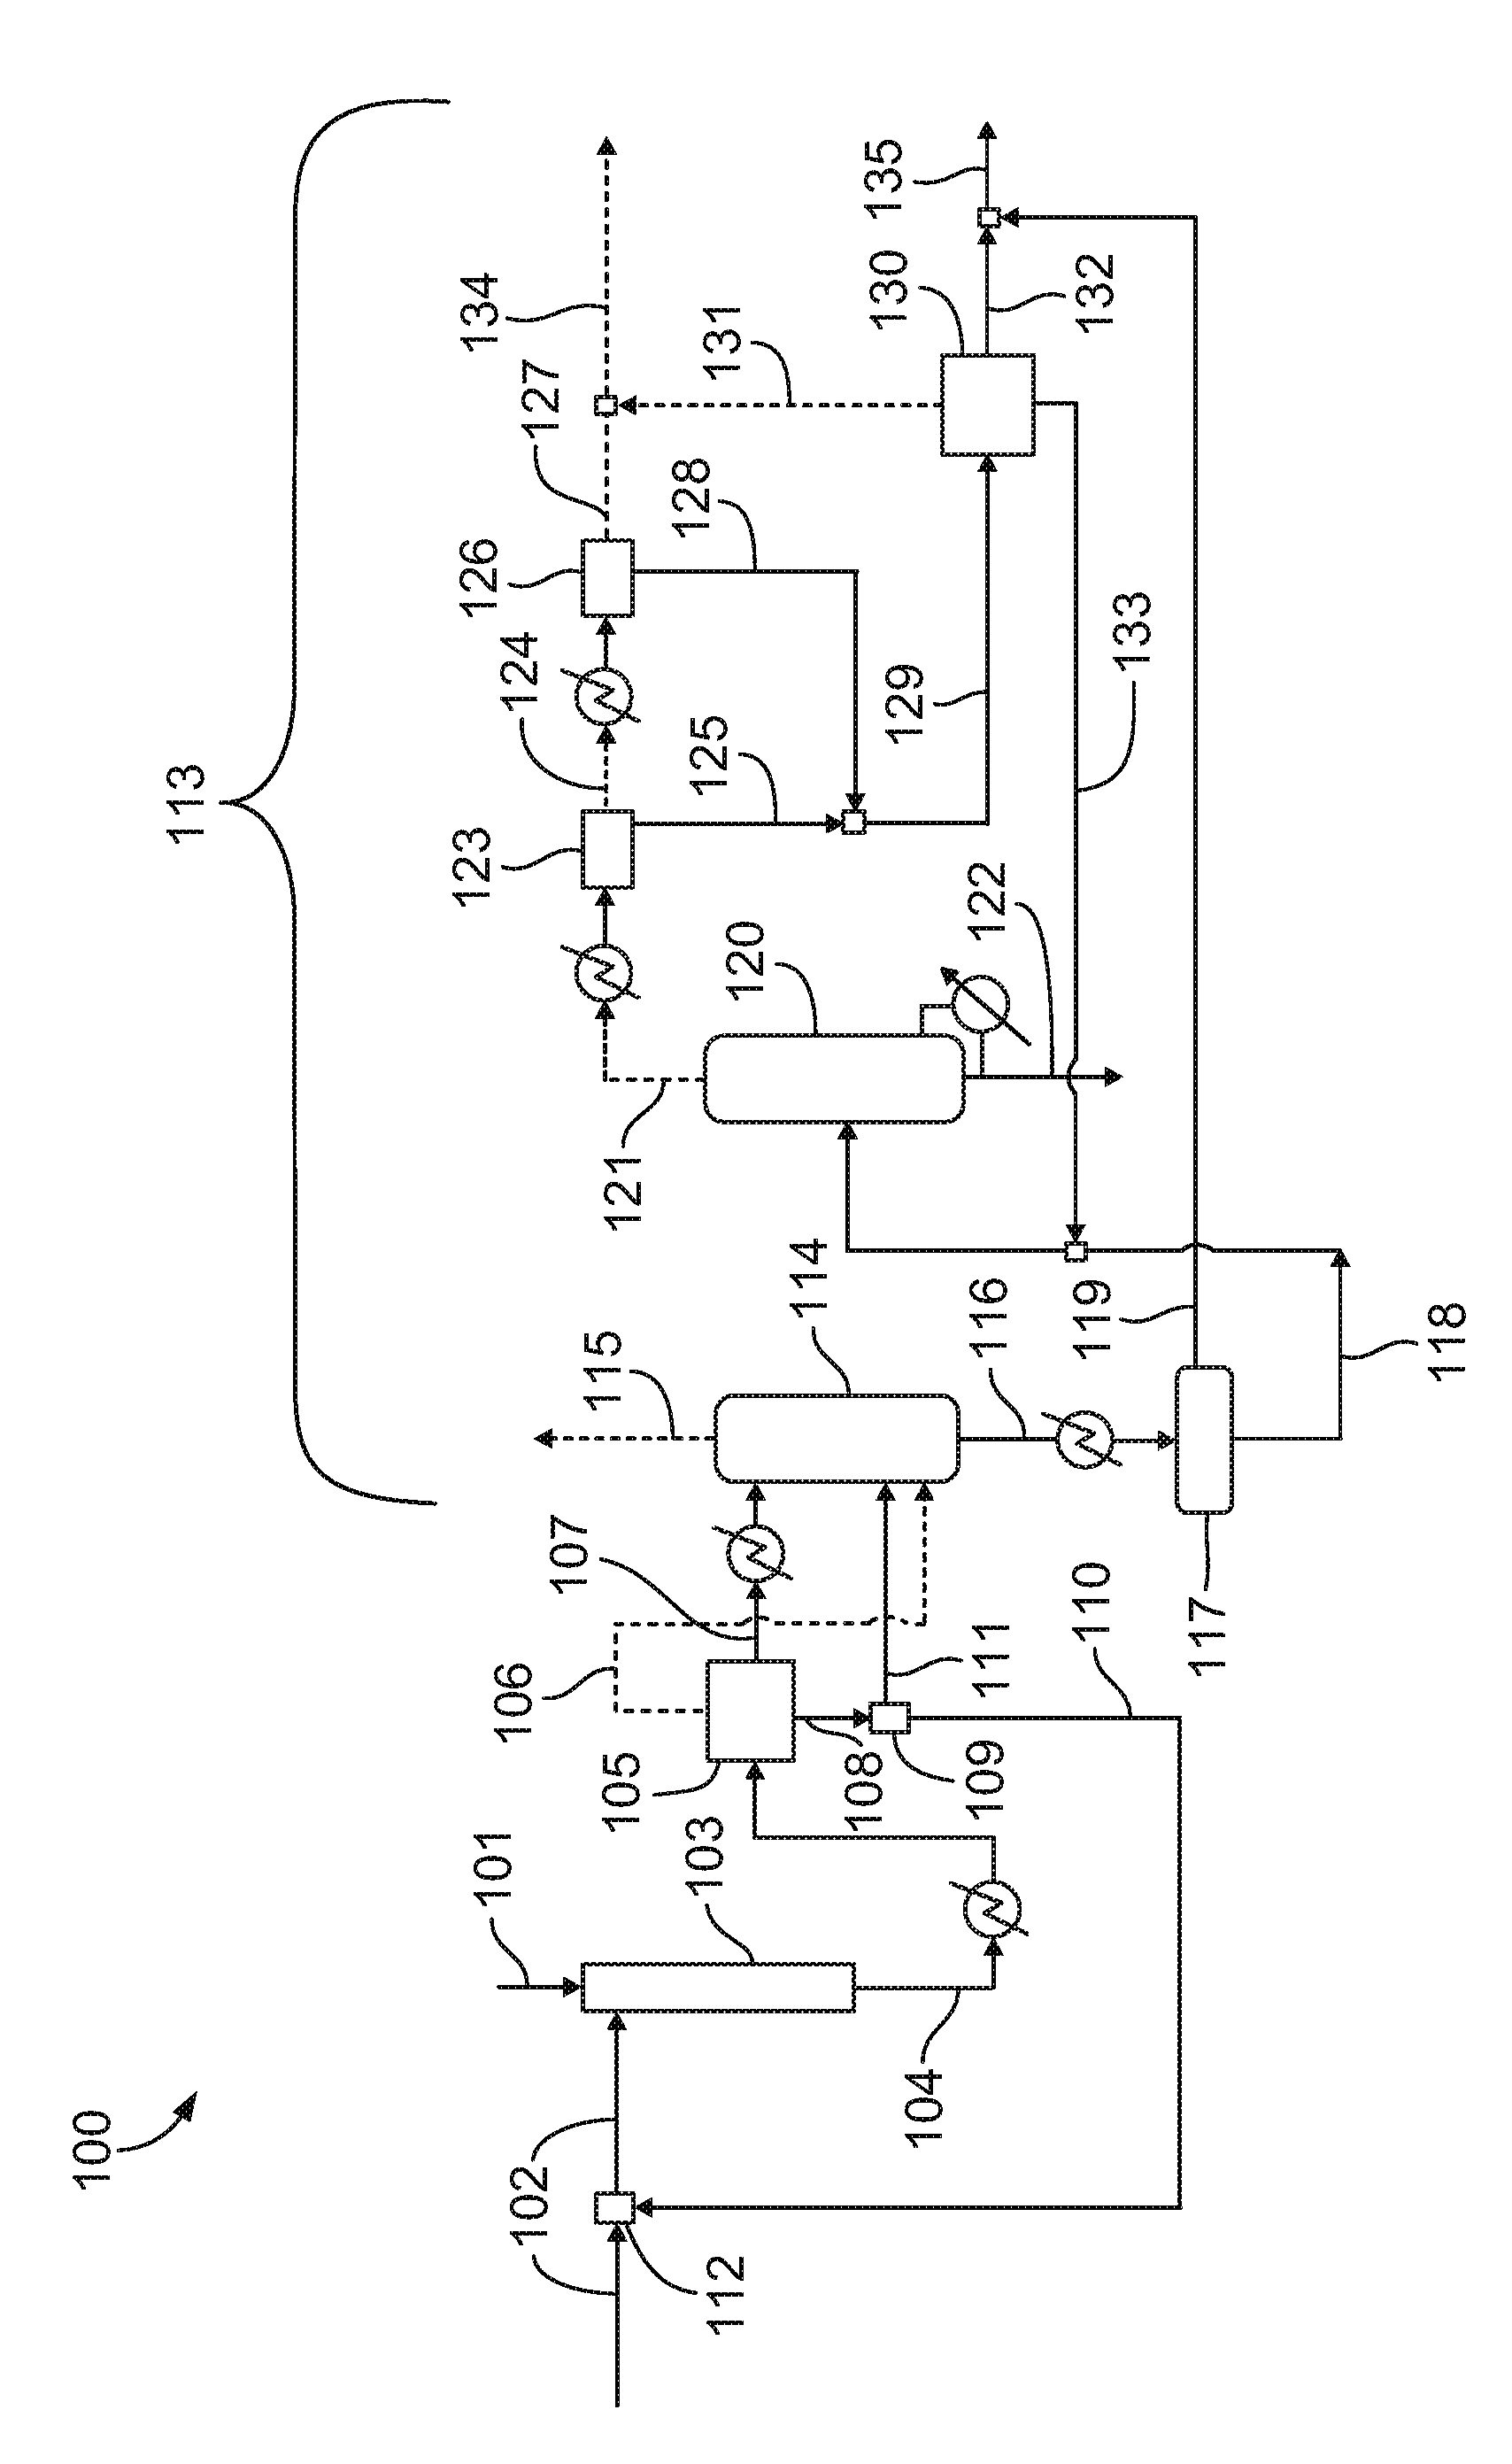 Process for nitroalkane recovery by aqueous phase recycle to nitration reactor